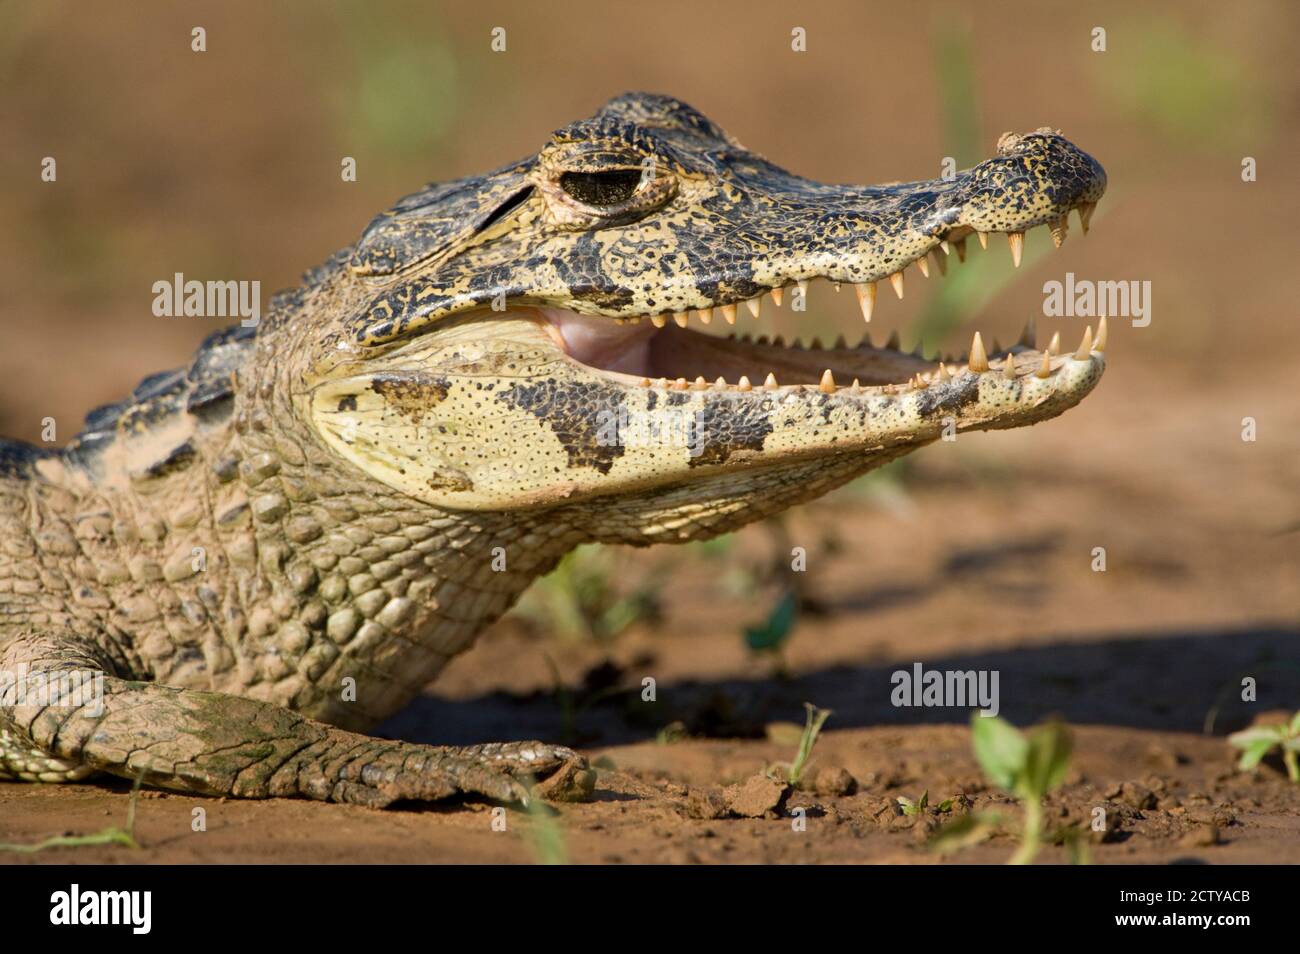 Yacare caiman (Ciman coccodrillo yacare), Three Brothers River, riunione del parco statale delle acque, Pantanal Wetlands, Brasile Foto Stock